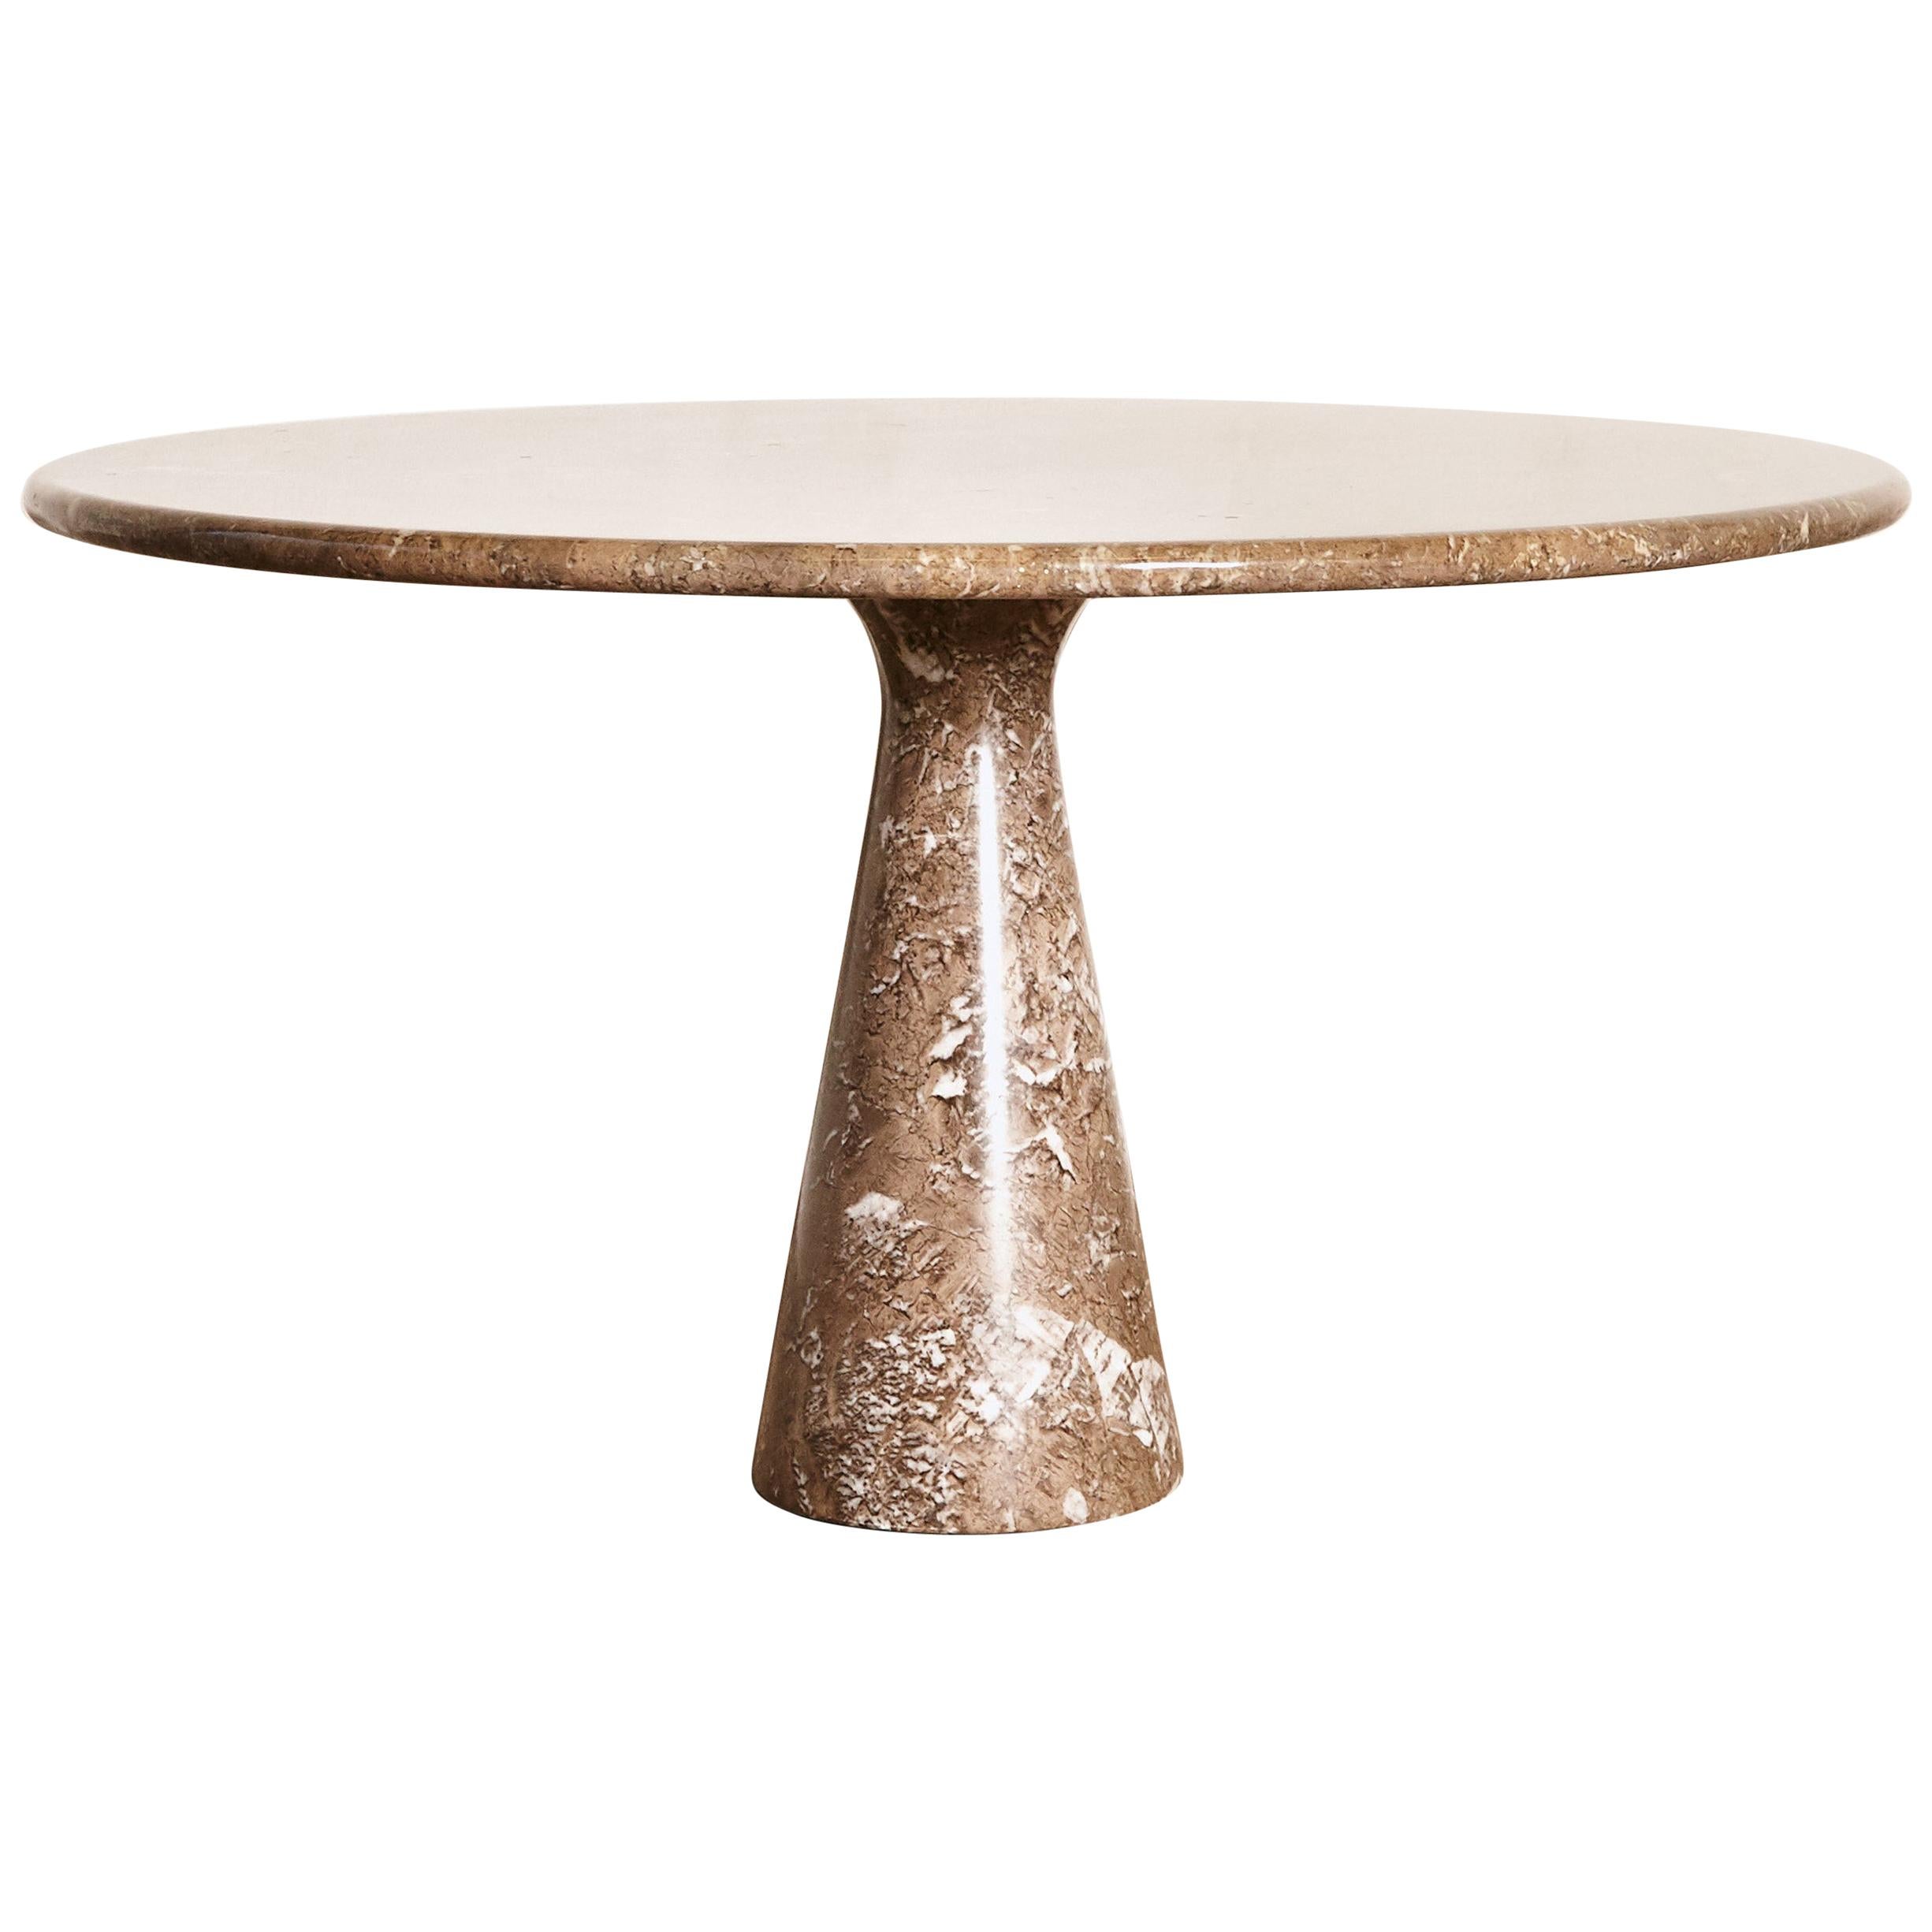 Angelo Mangiarotti Round Marble M1 Dining Table, Italy, 1960s/70s